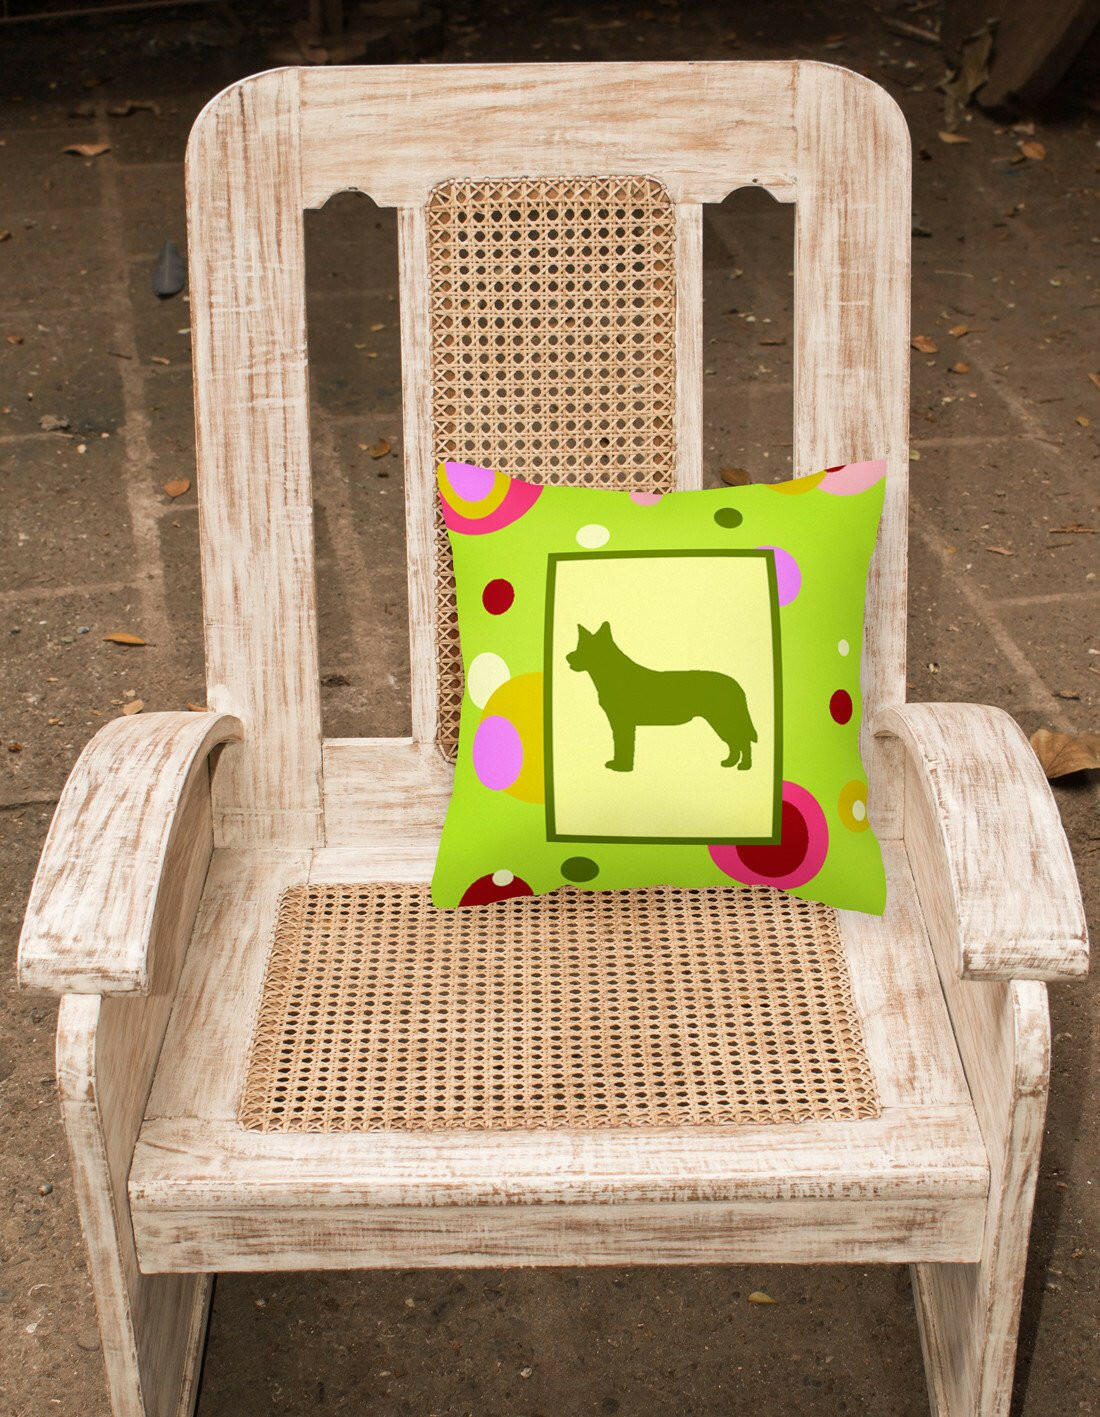 Lime Green Dots Australian Cattle Dog Fabric Decorative Pillow CK1110PW1414 by Caroline's Treasures